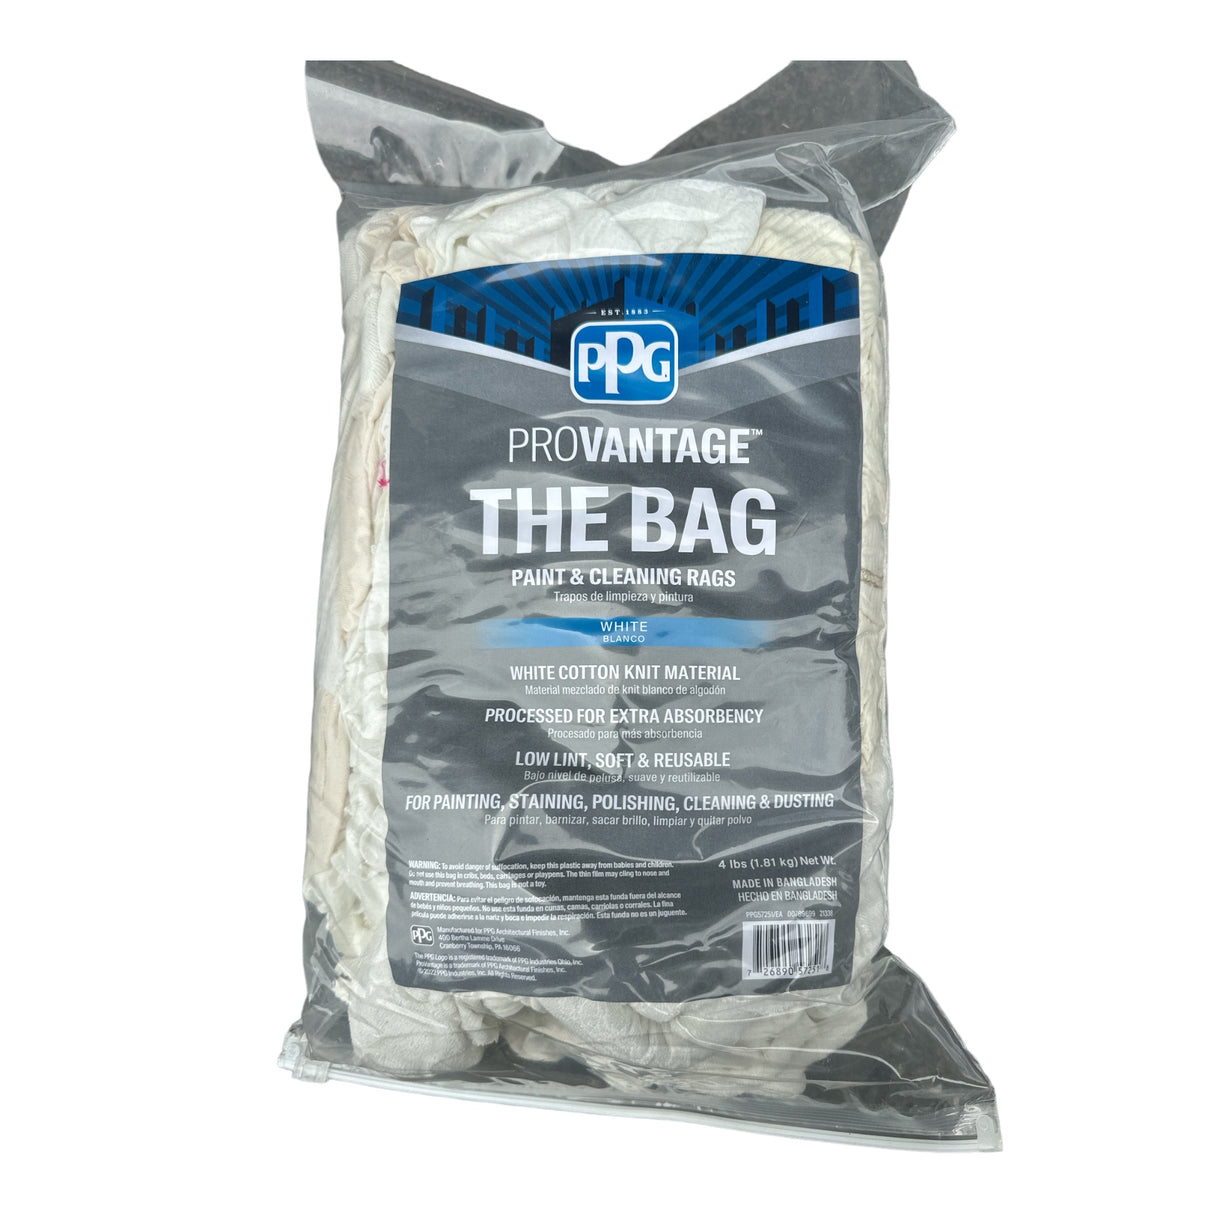 PPG ProVantage “The Bag” Paint & Cleaning Rags